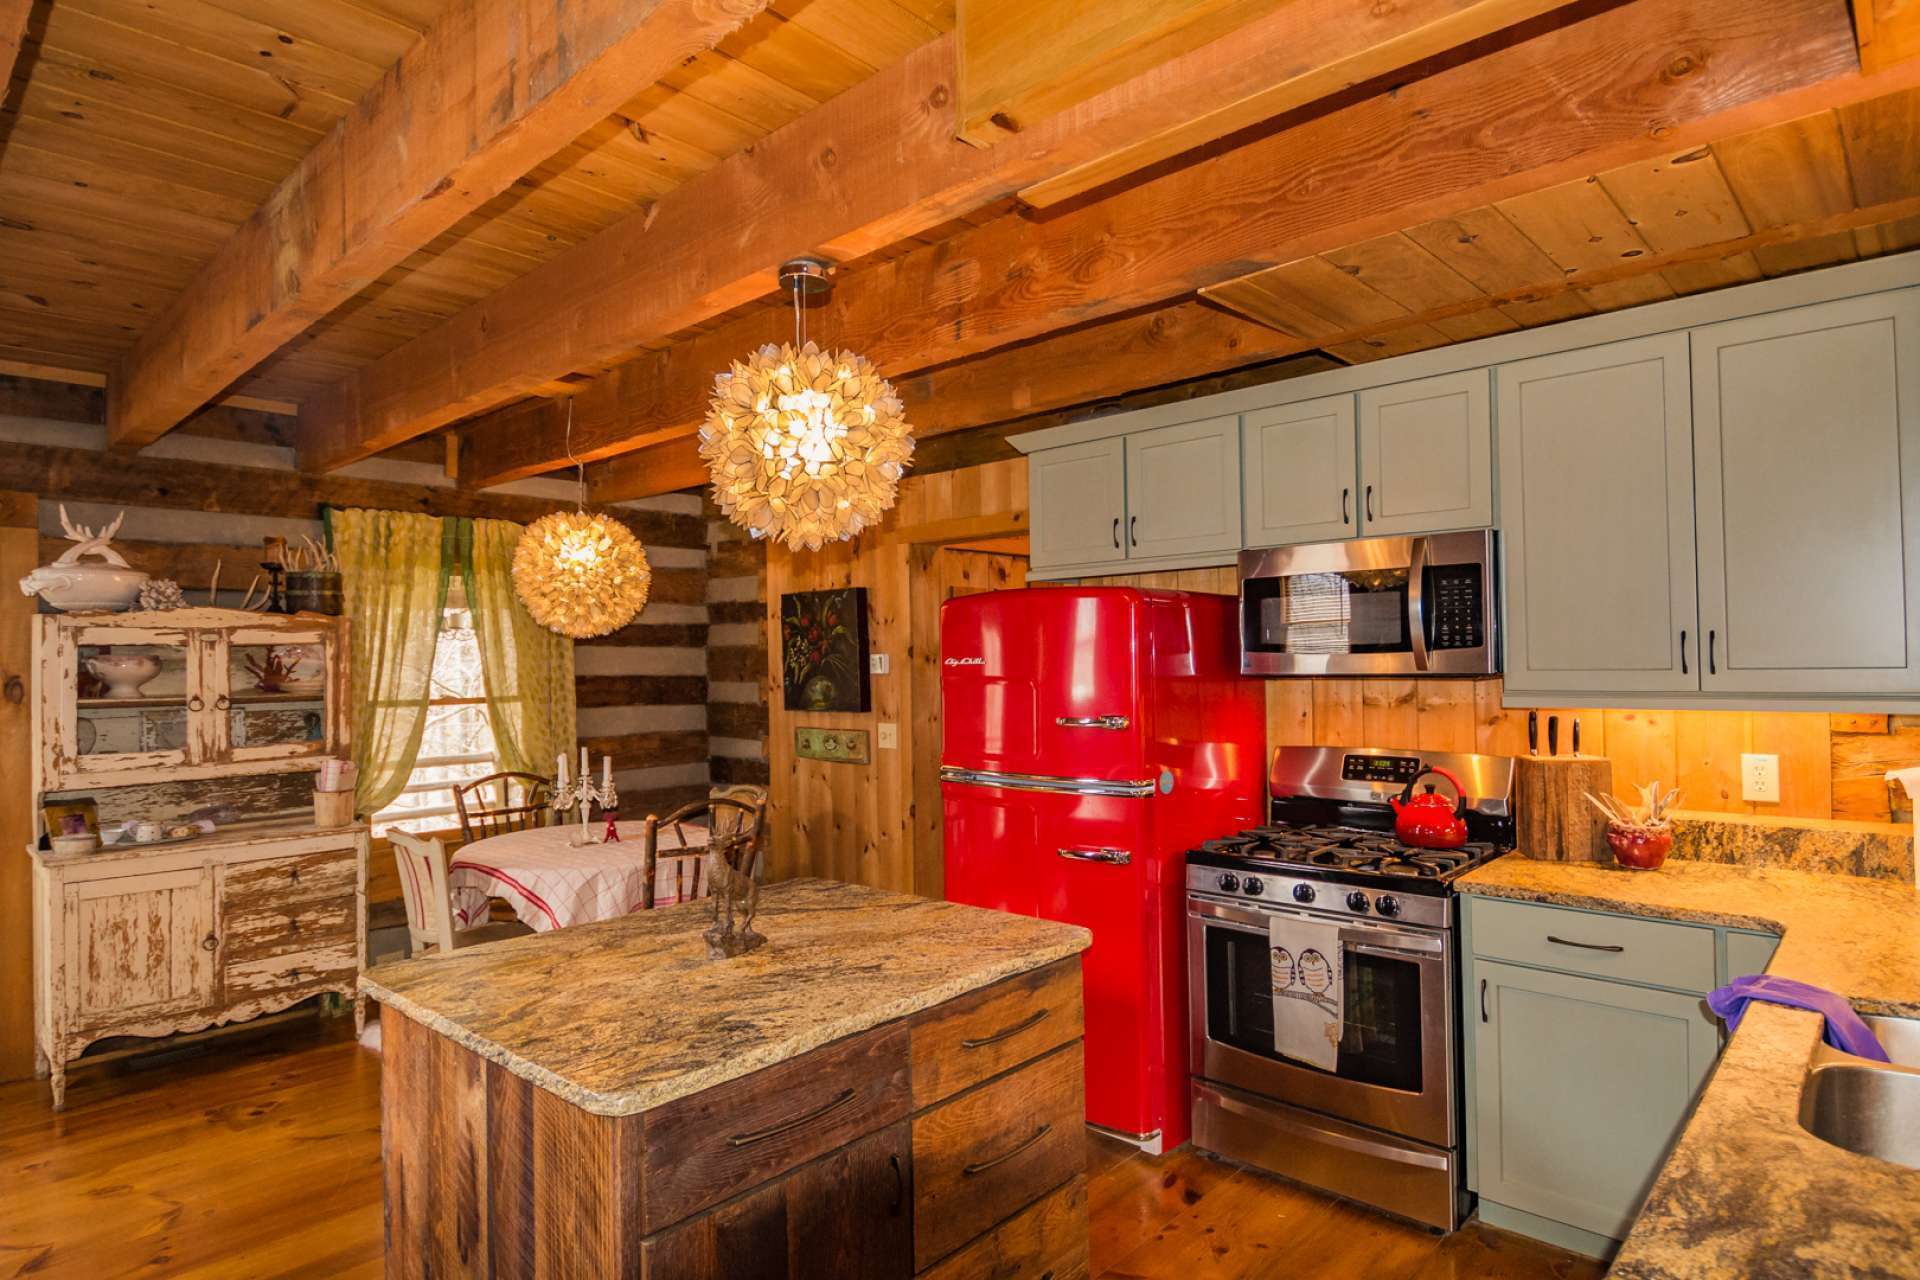 This beautiful cabin offers three levels of living space and over 1100 sq. ft. of decking and covered porch space for outdoor dining, entertaining, or simply relaxing.